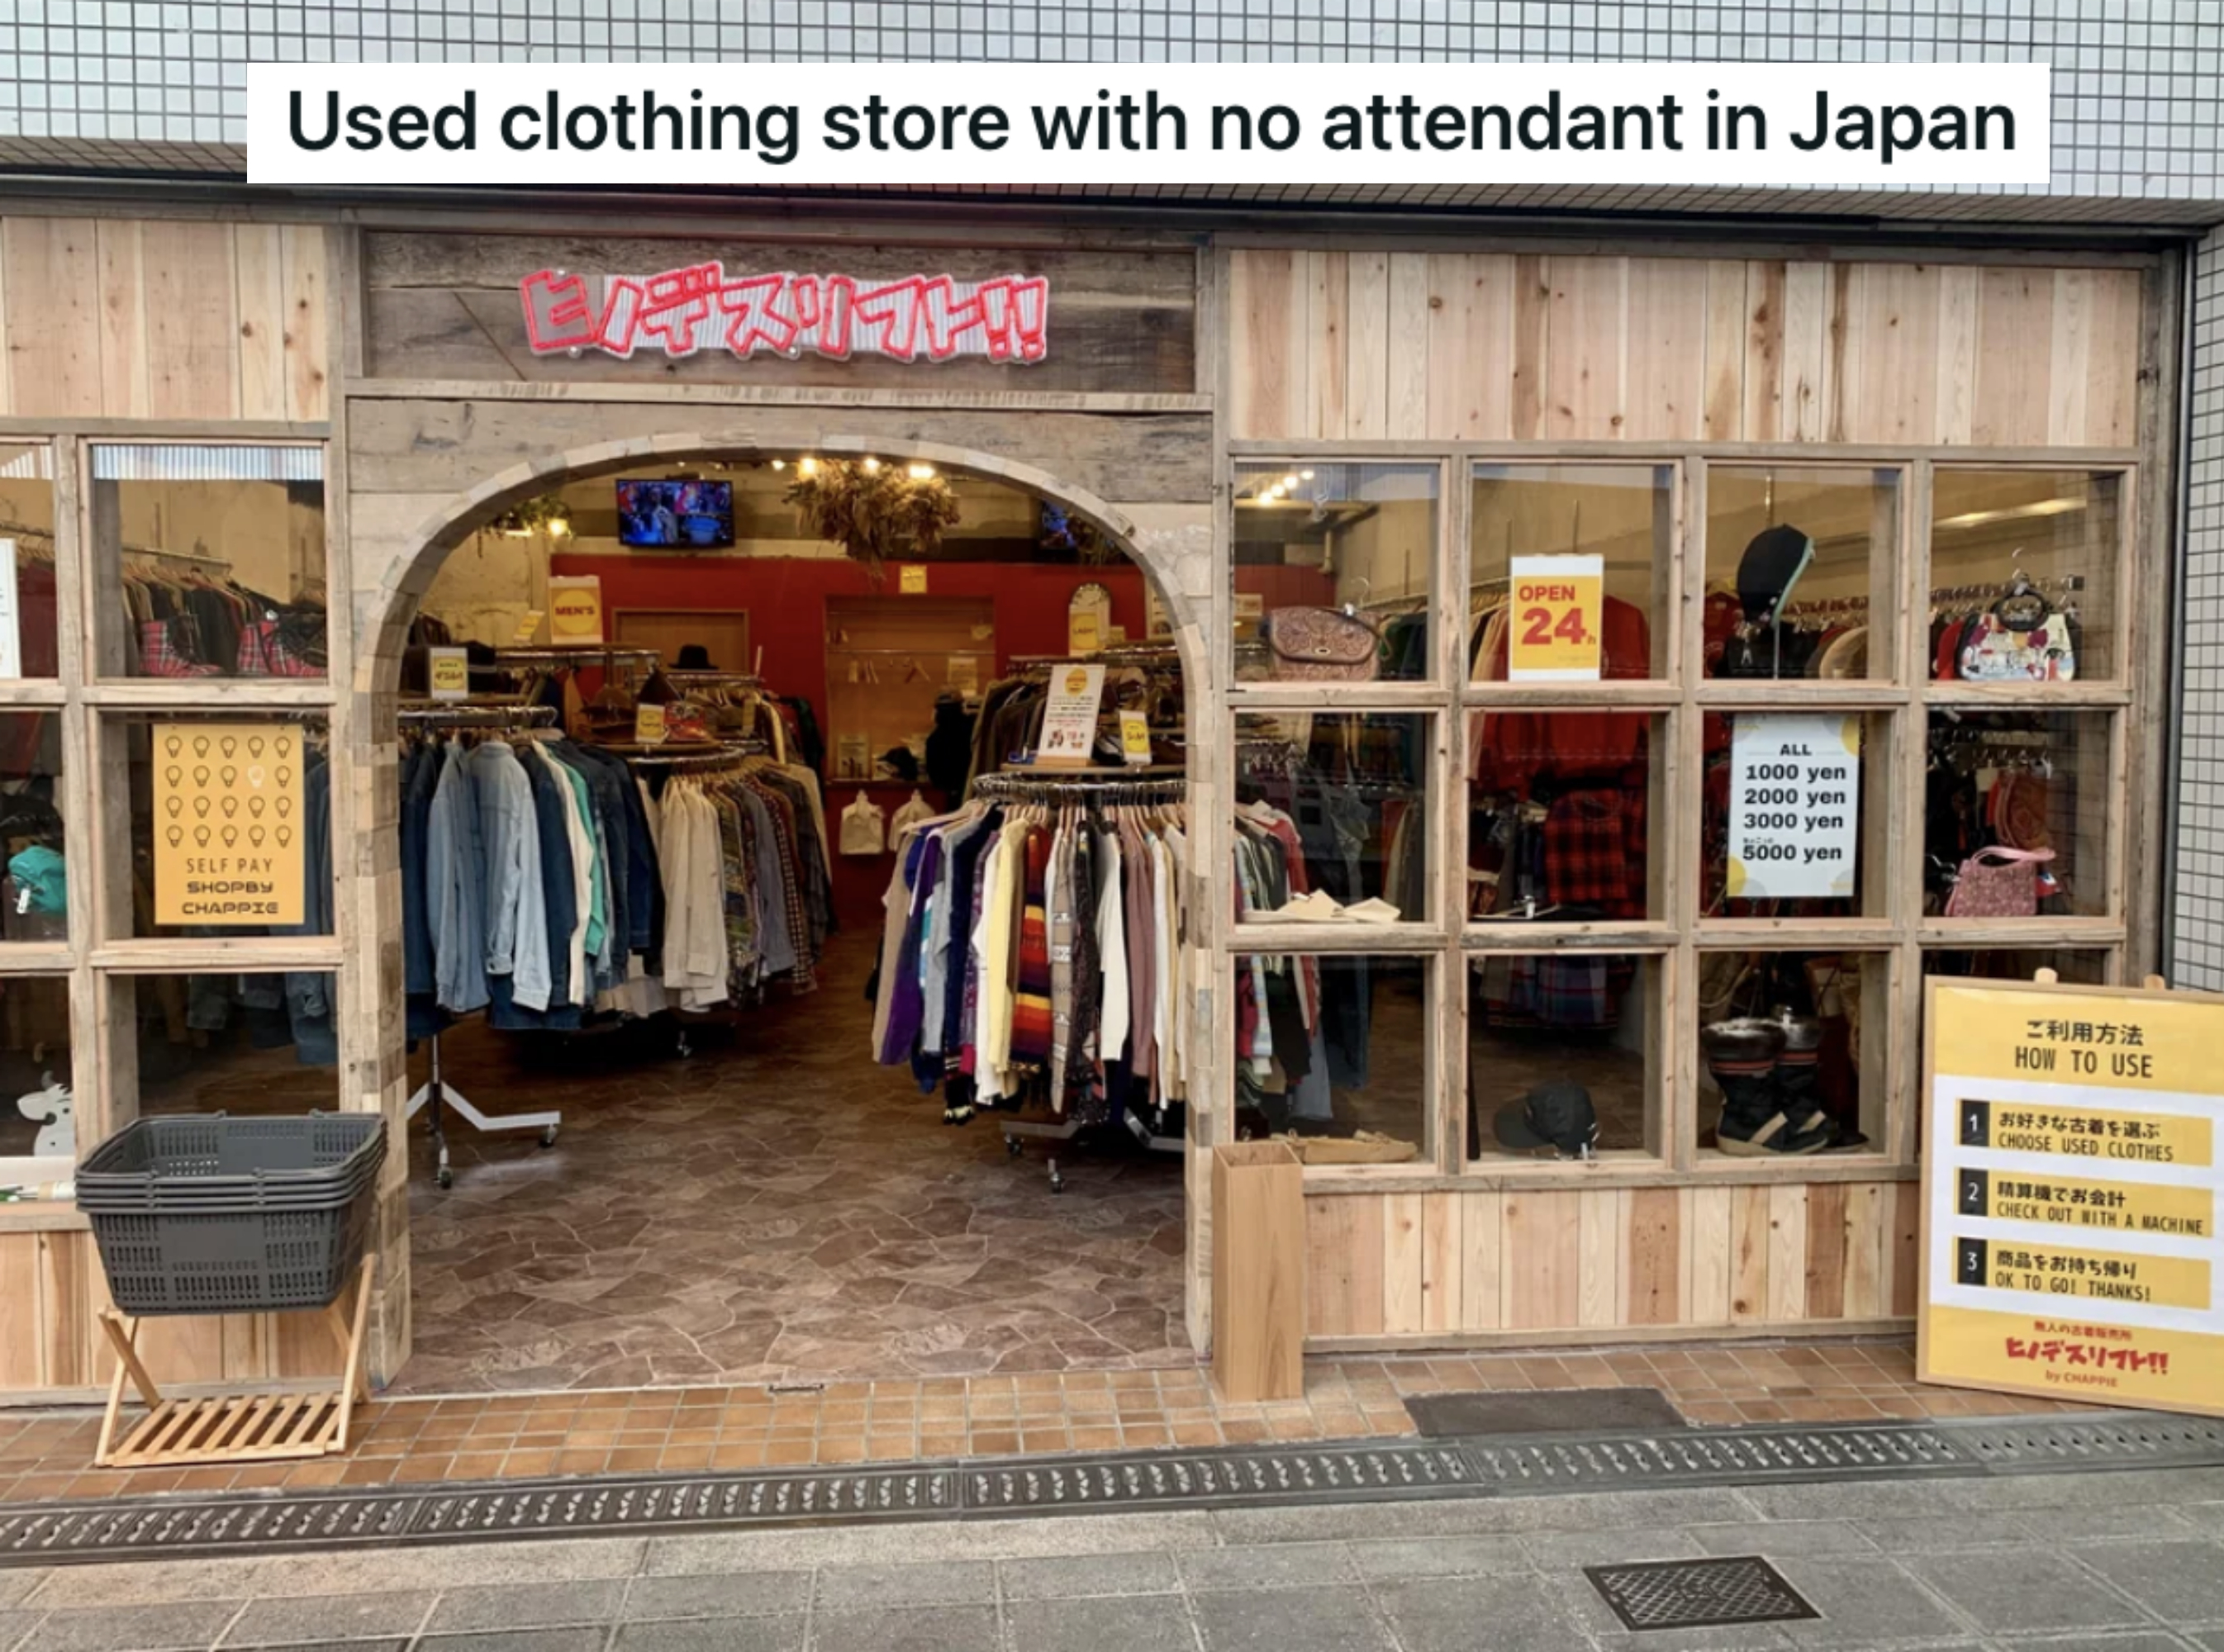 &quot;Used clothing store with no attendant in Japan&quot;